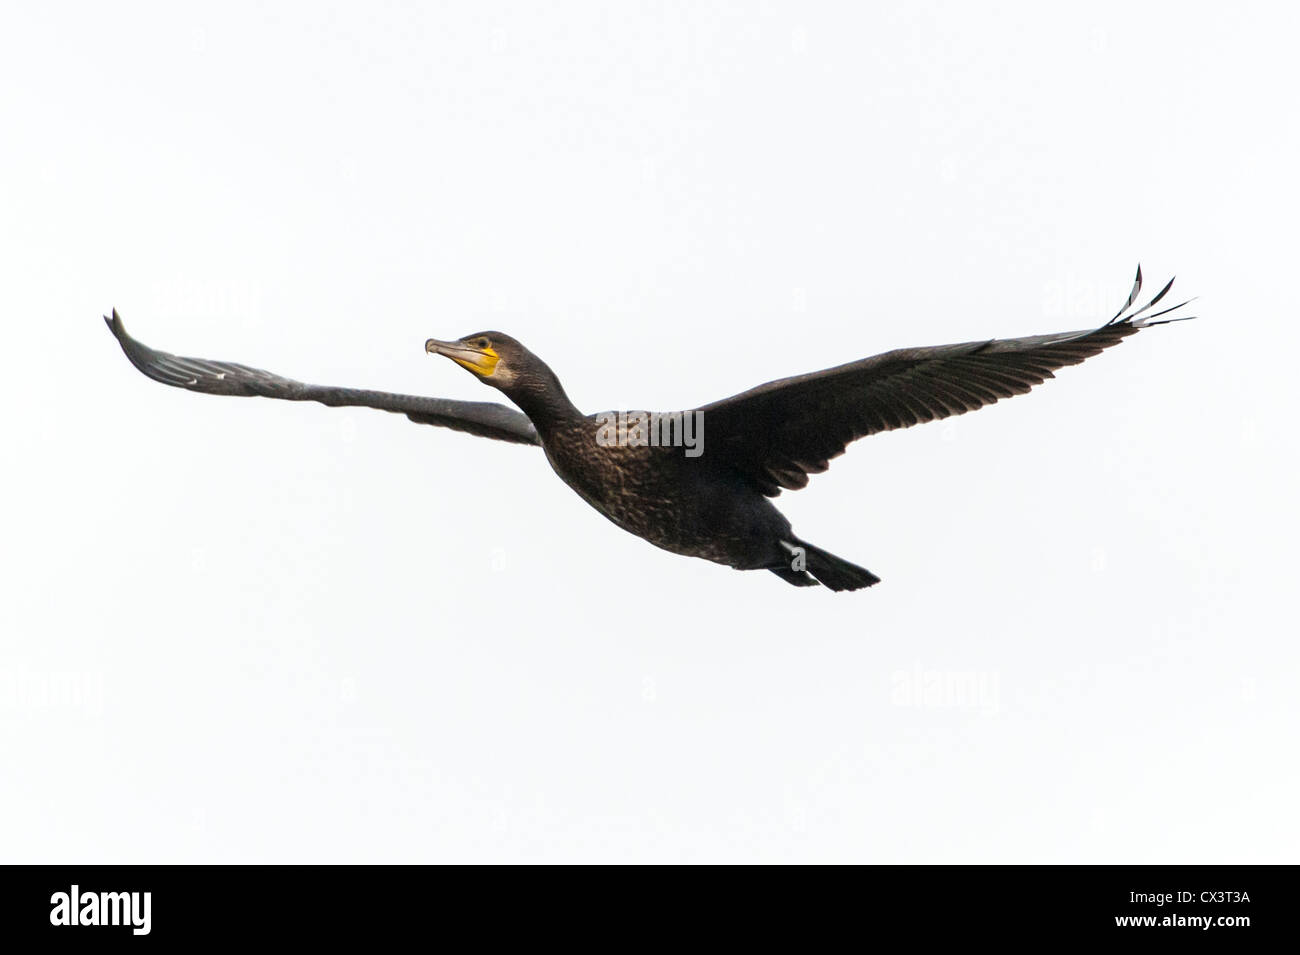 Cormorant (Phalacrocorax carbo) flying against a white background at the River Doon in Ayr, Scotland. Stock Photo